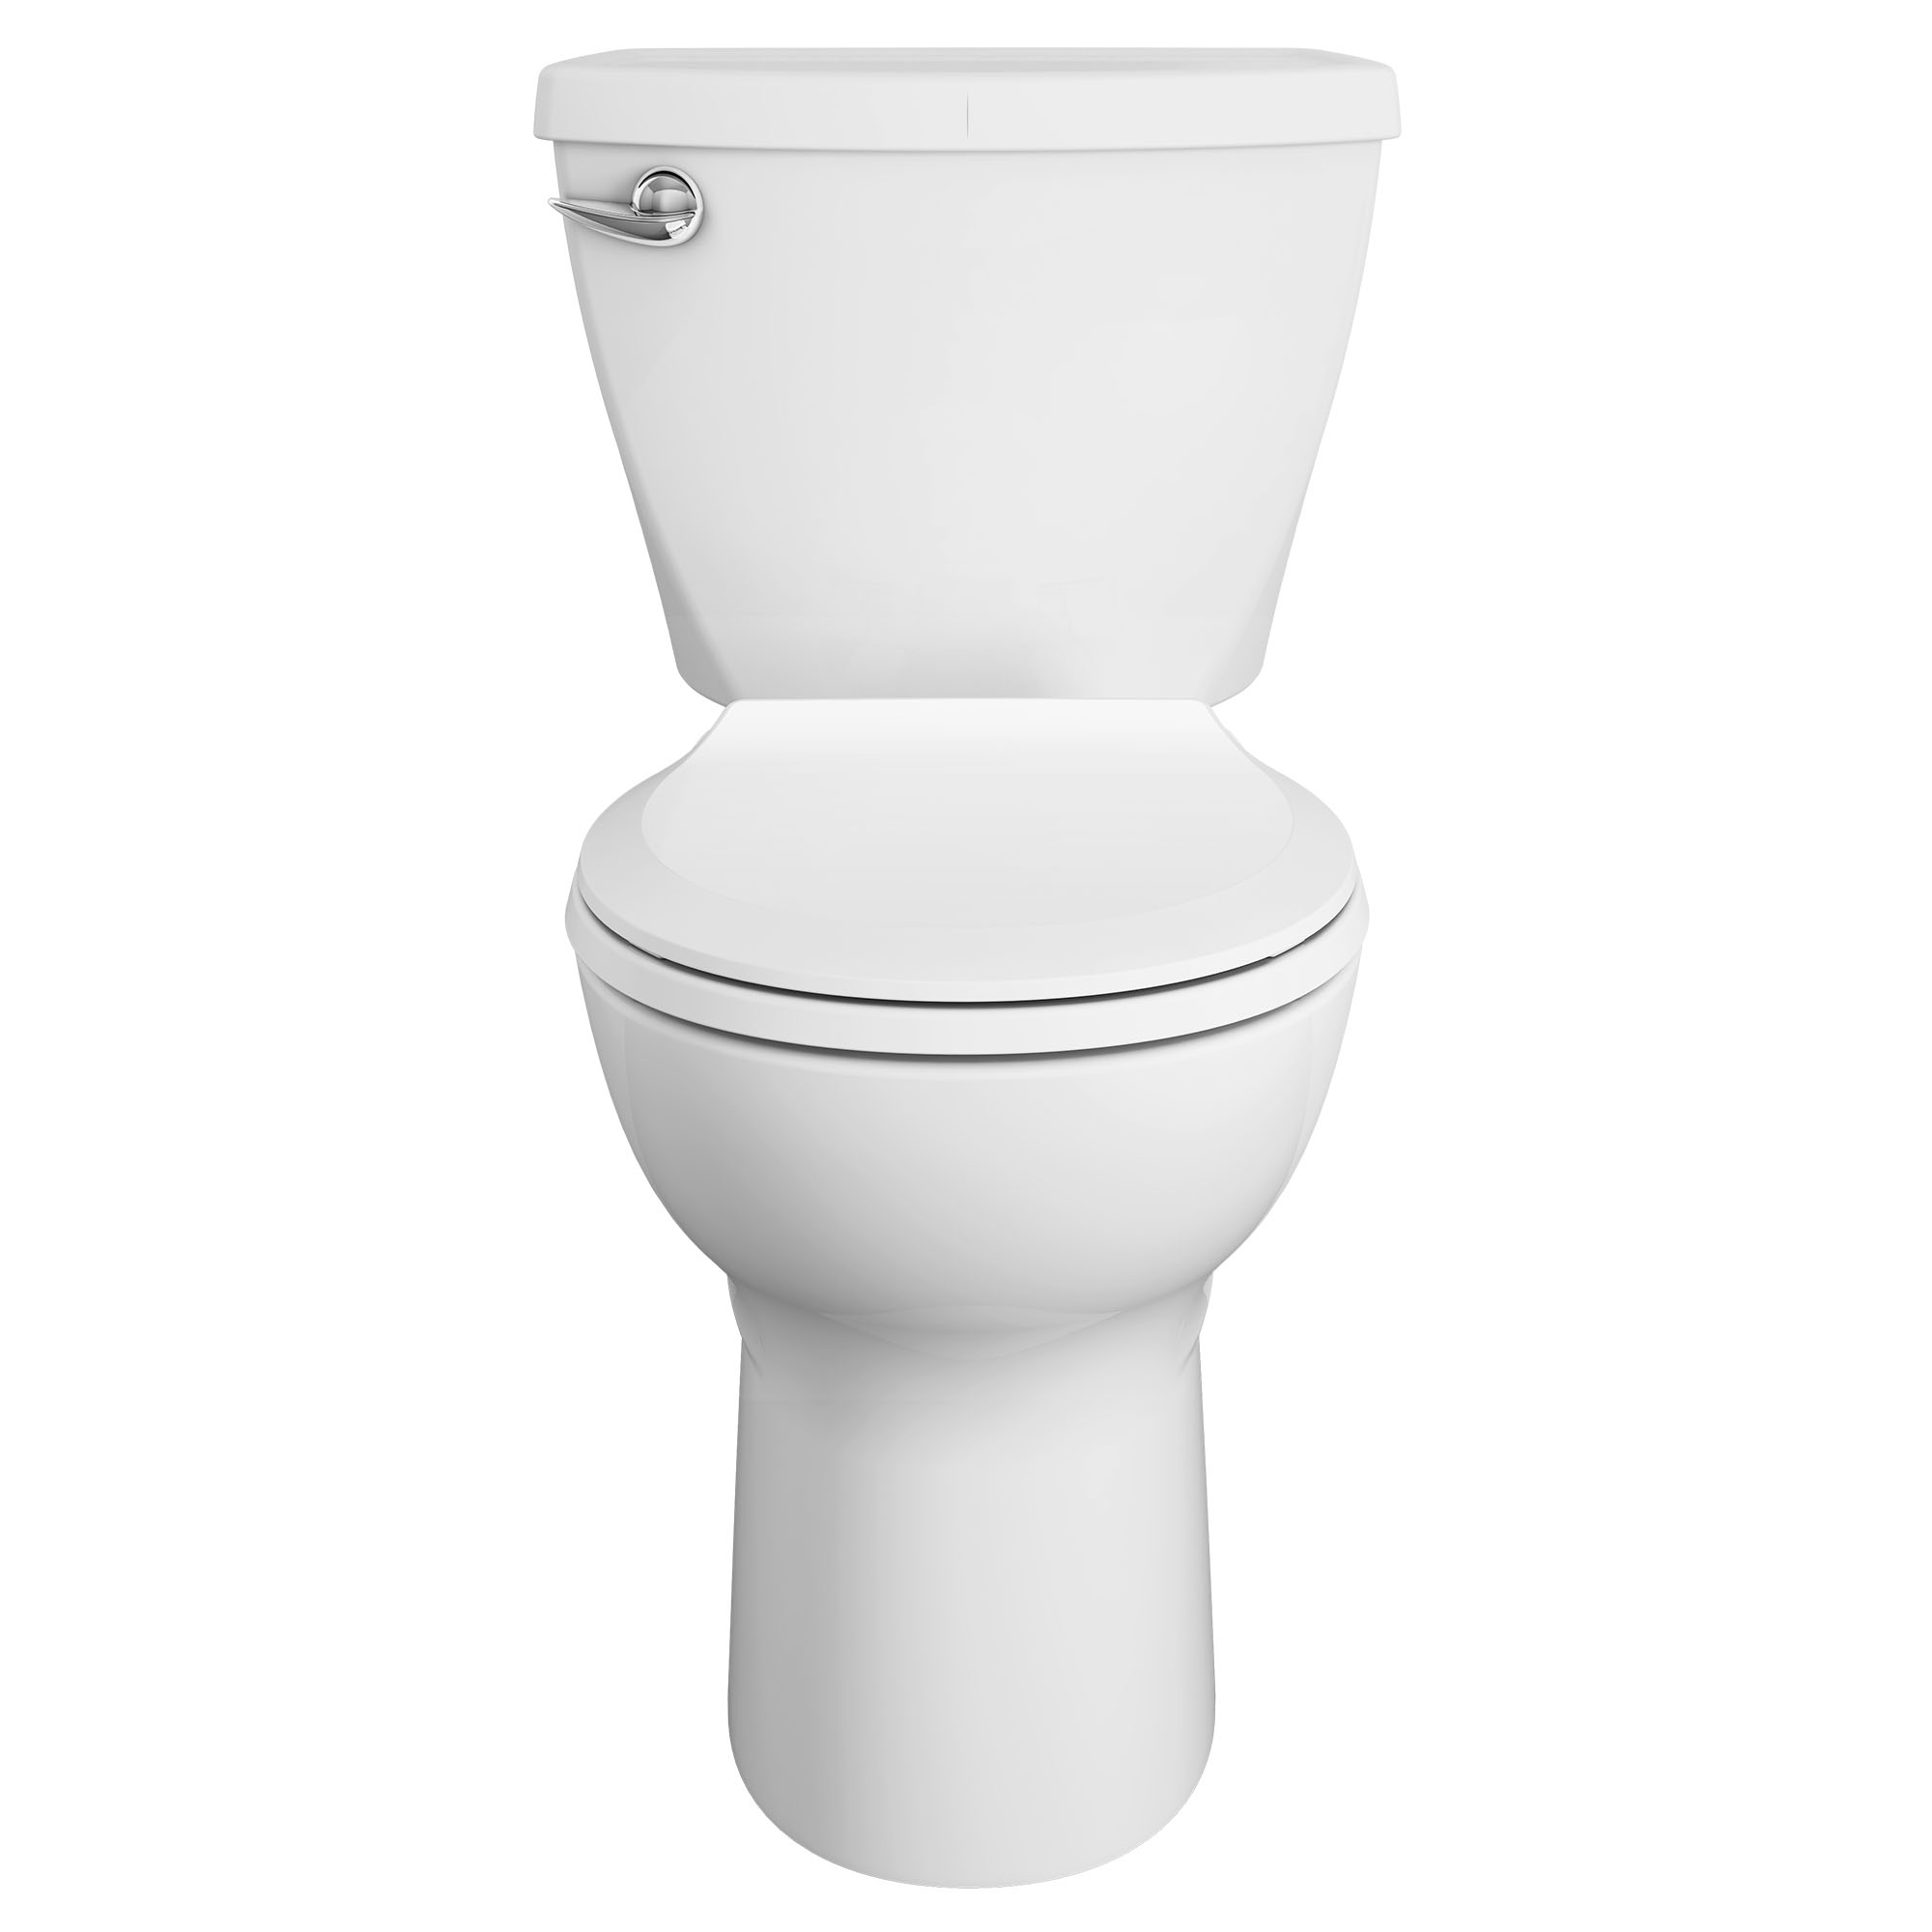 Cadet 3 FloWise 1.28 GPF/4.8 LPF Left Trip Lever 16/1-2-in. Round-Front Toilet with Slow-Close Seat